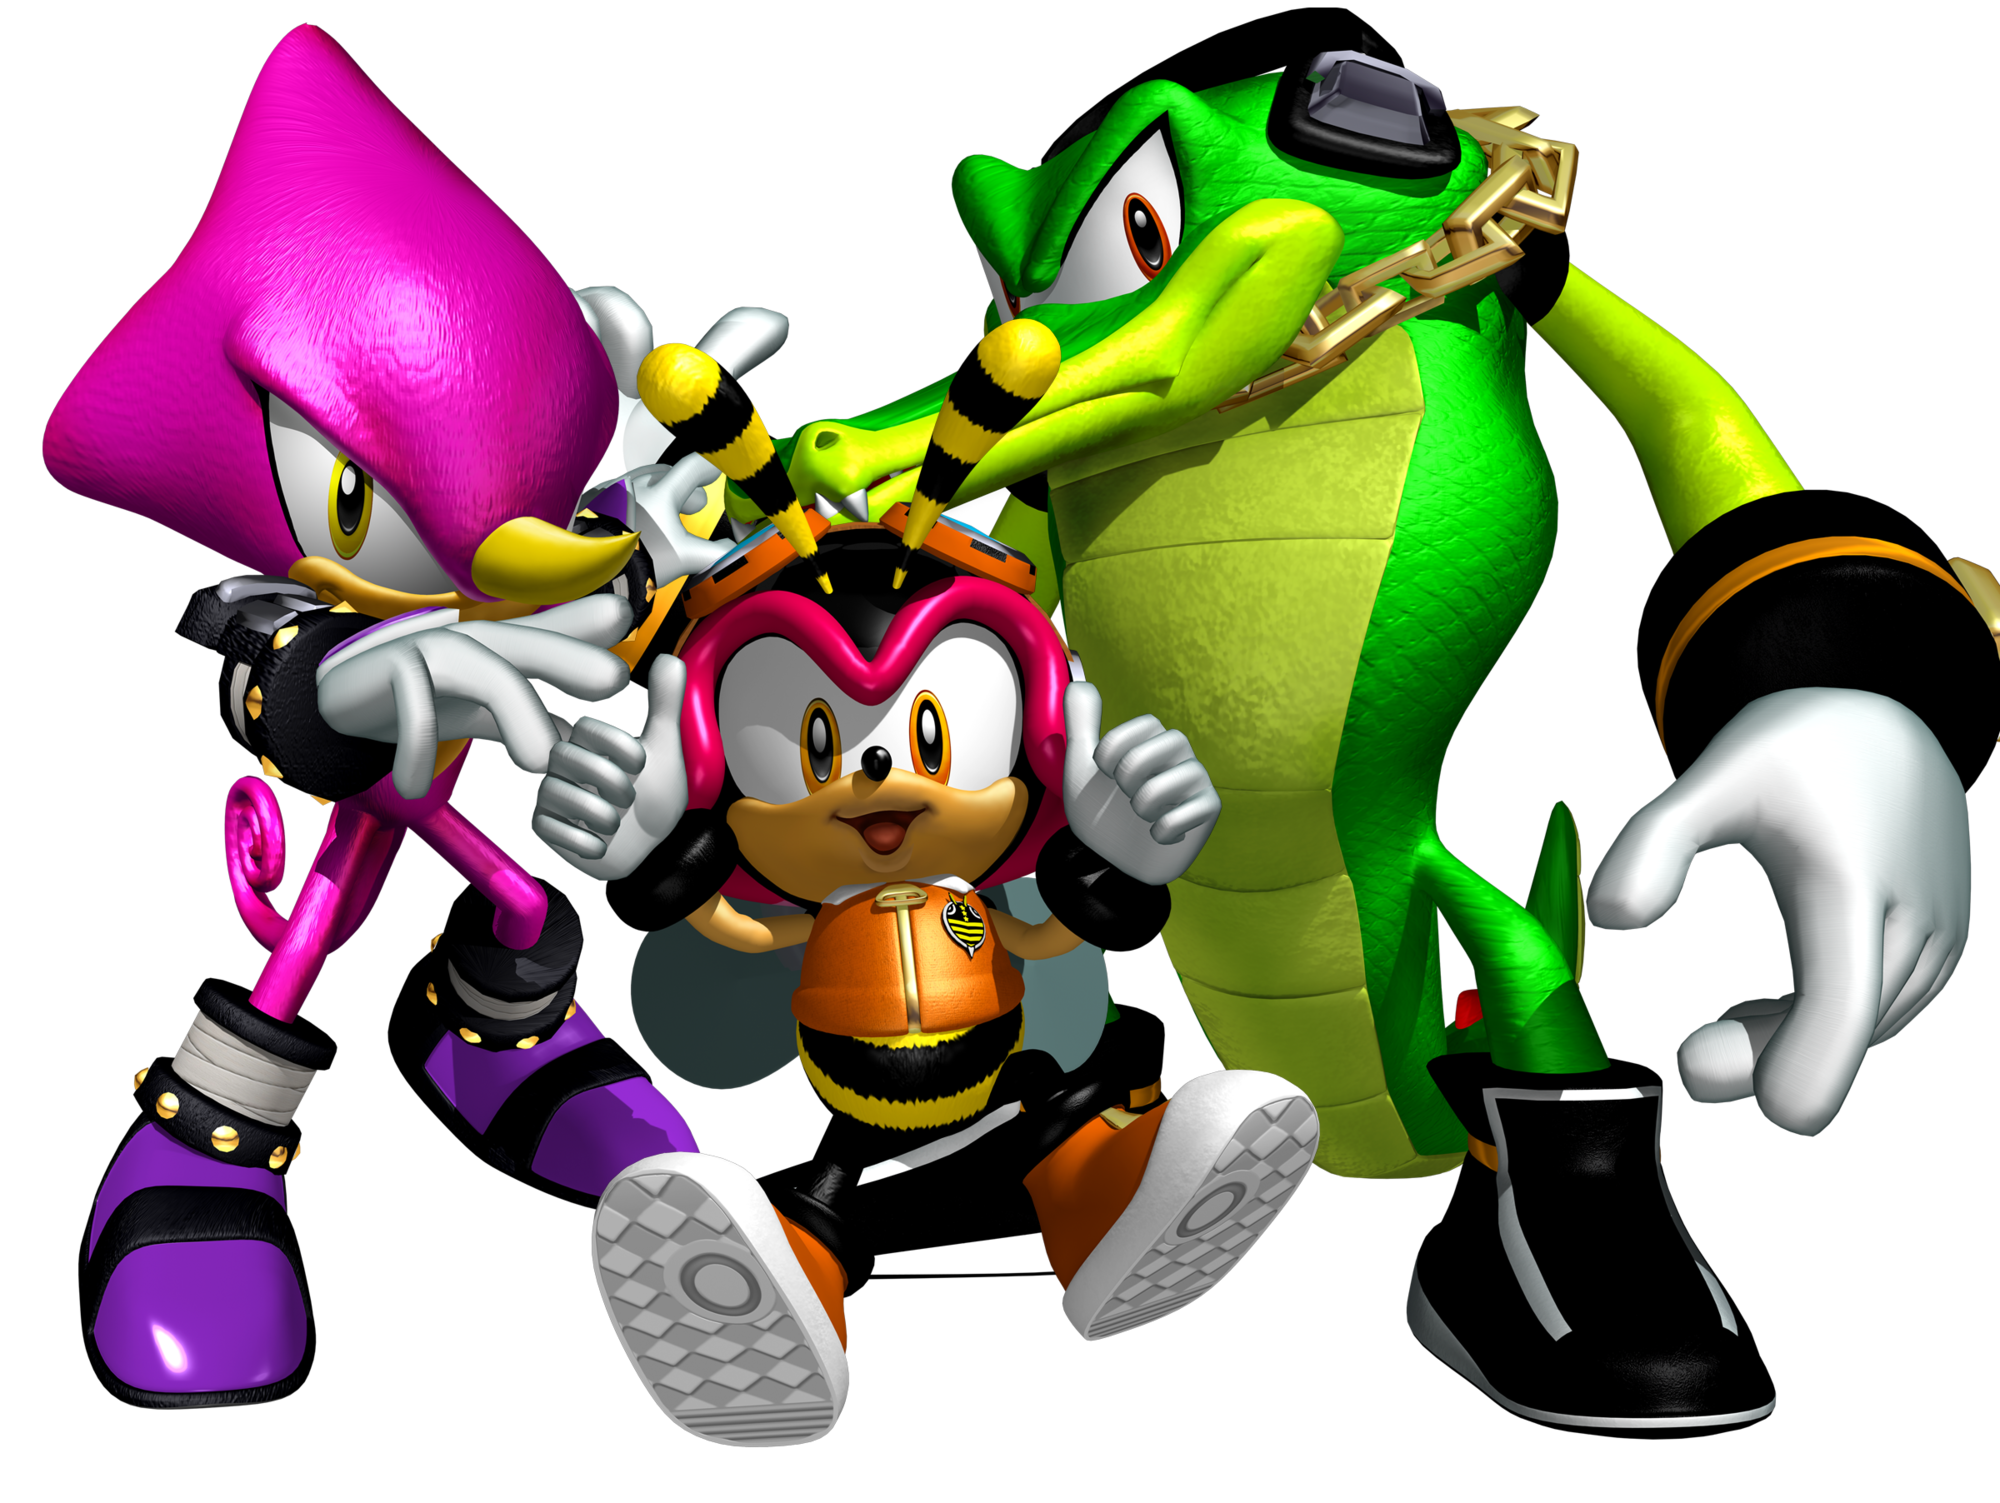 Knuckles’ Chaotix Hardcore Gaming 101